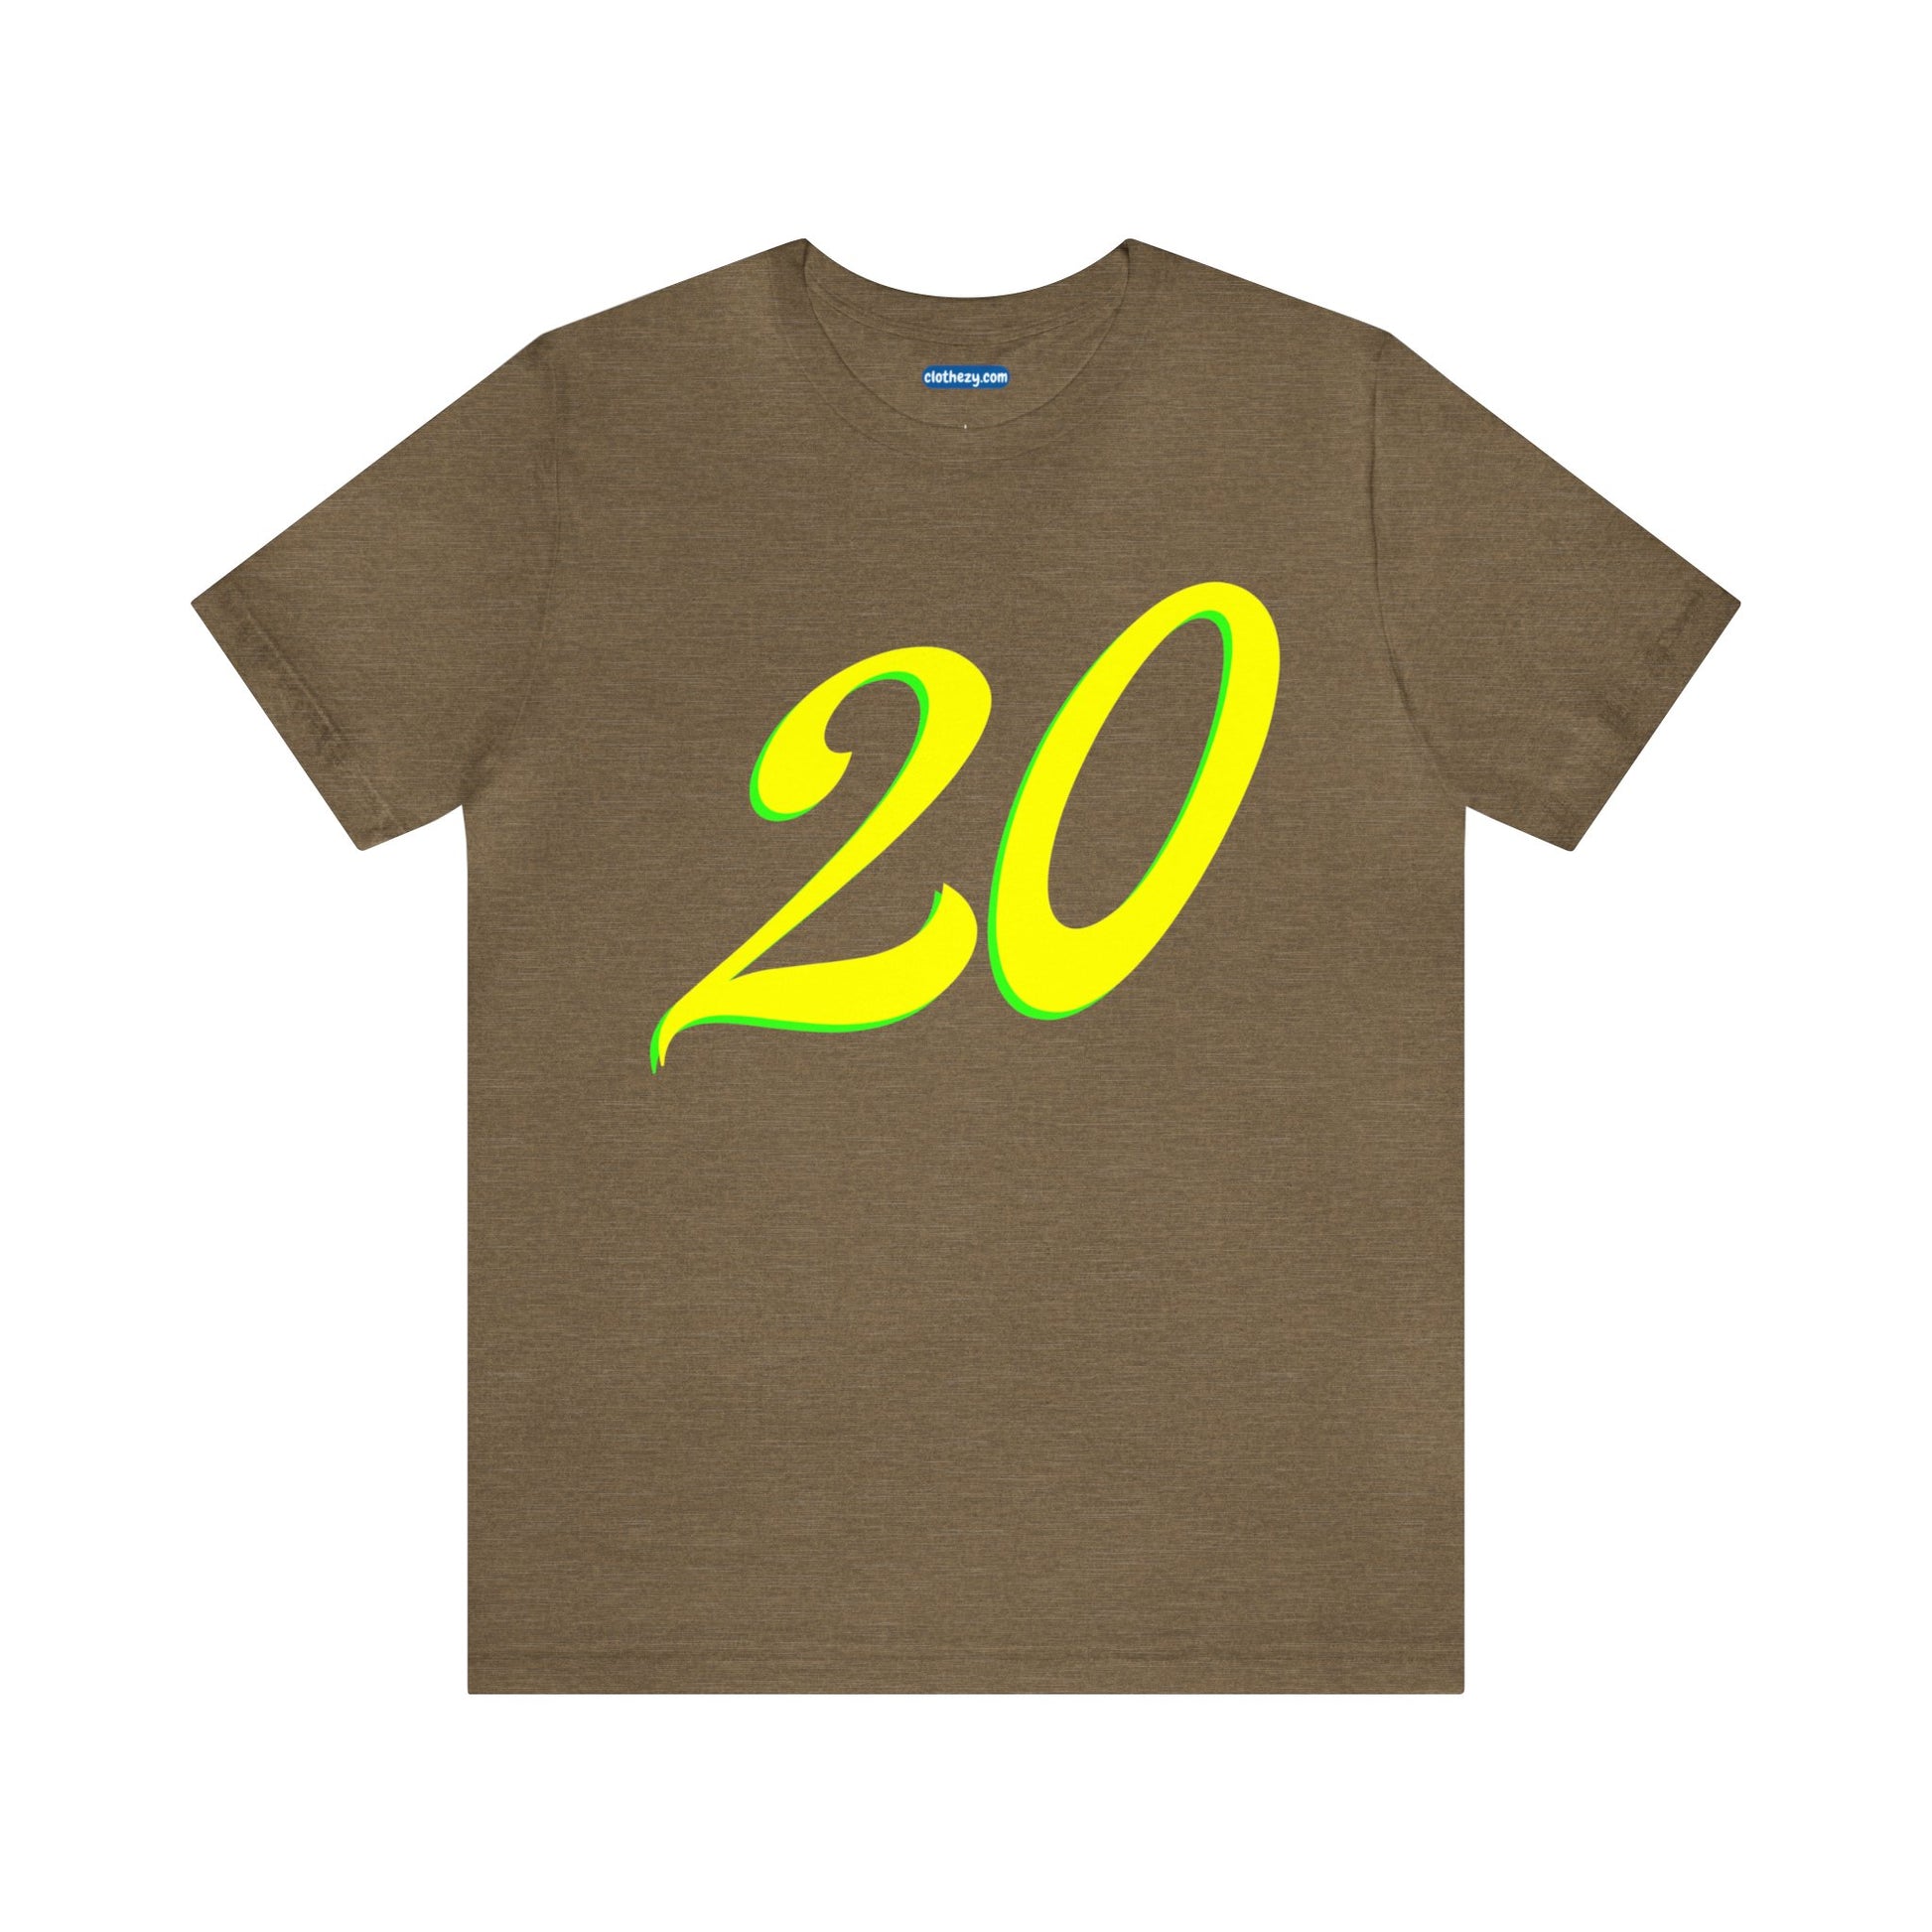 Number 20 Design - Soft Cotton Tee for birthdays and celebrations, Gift for friends and family, Multiple Options by clothezy.com in Olive Heather Size Small - Buy Now